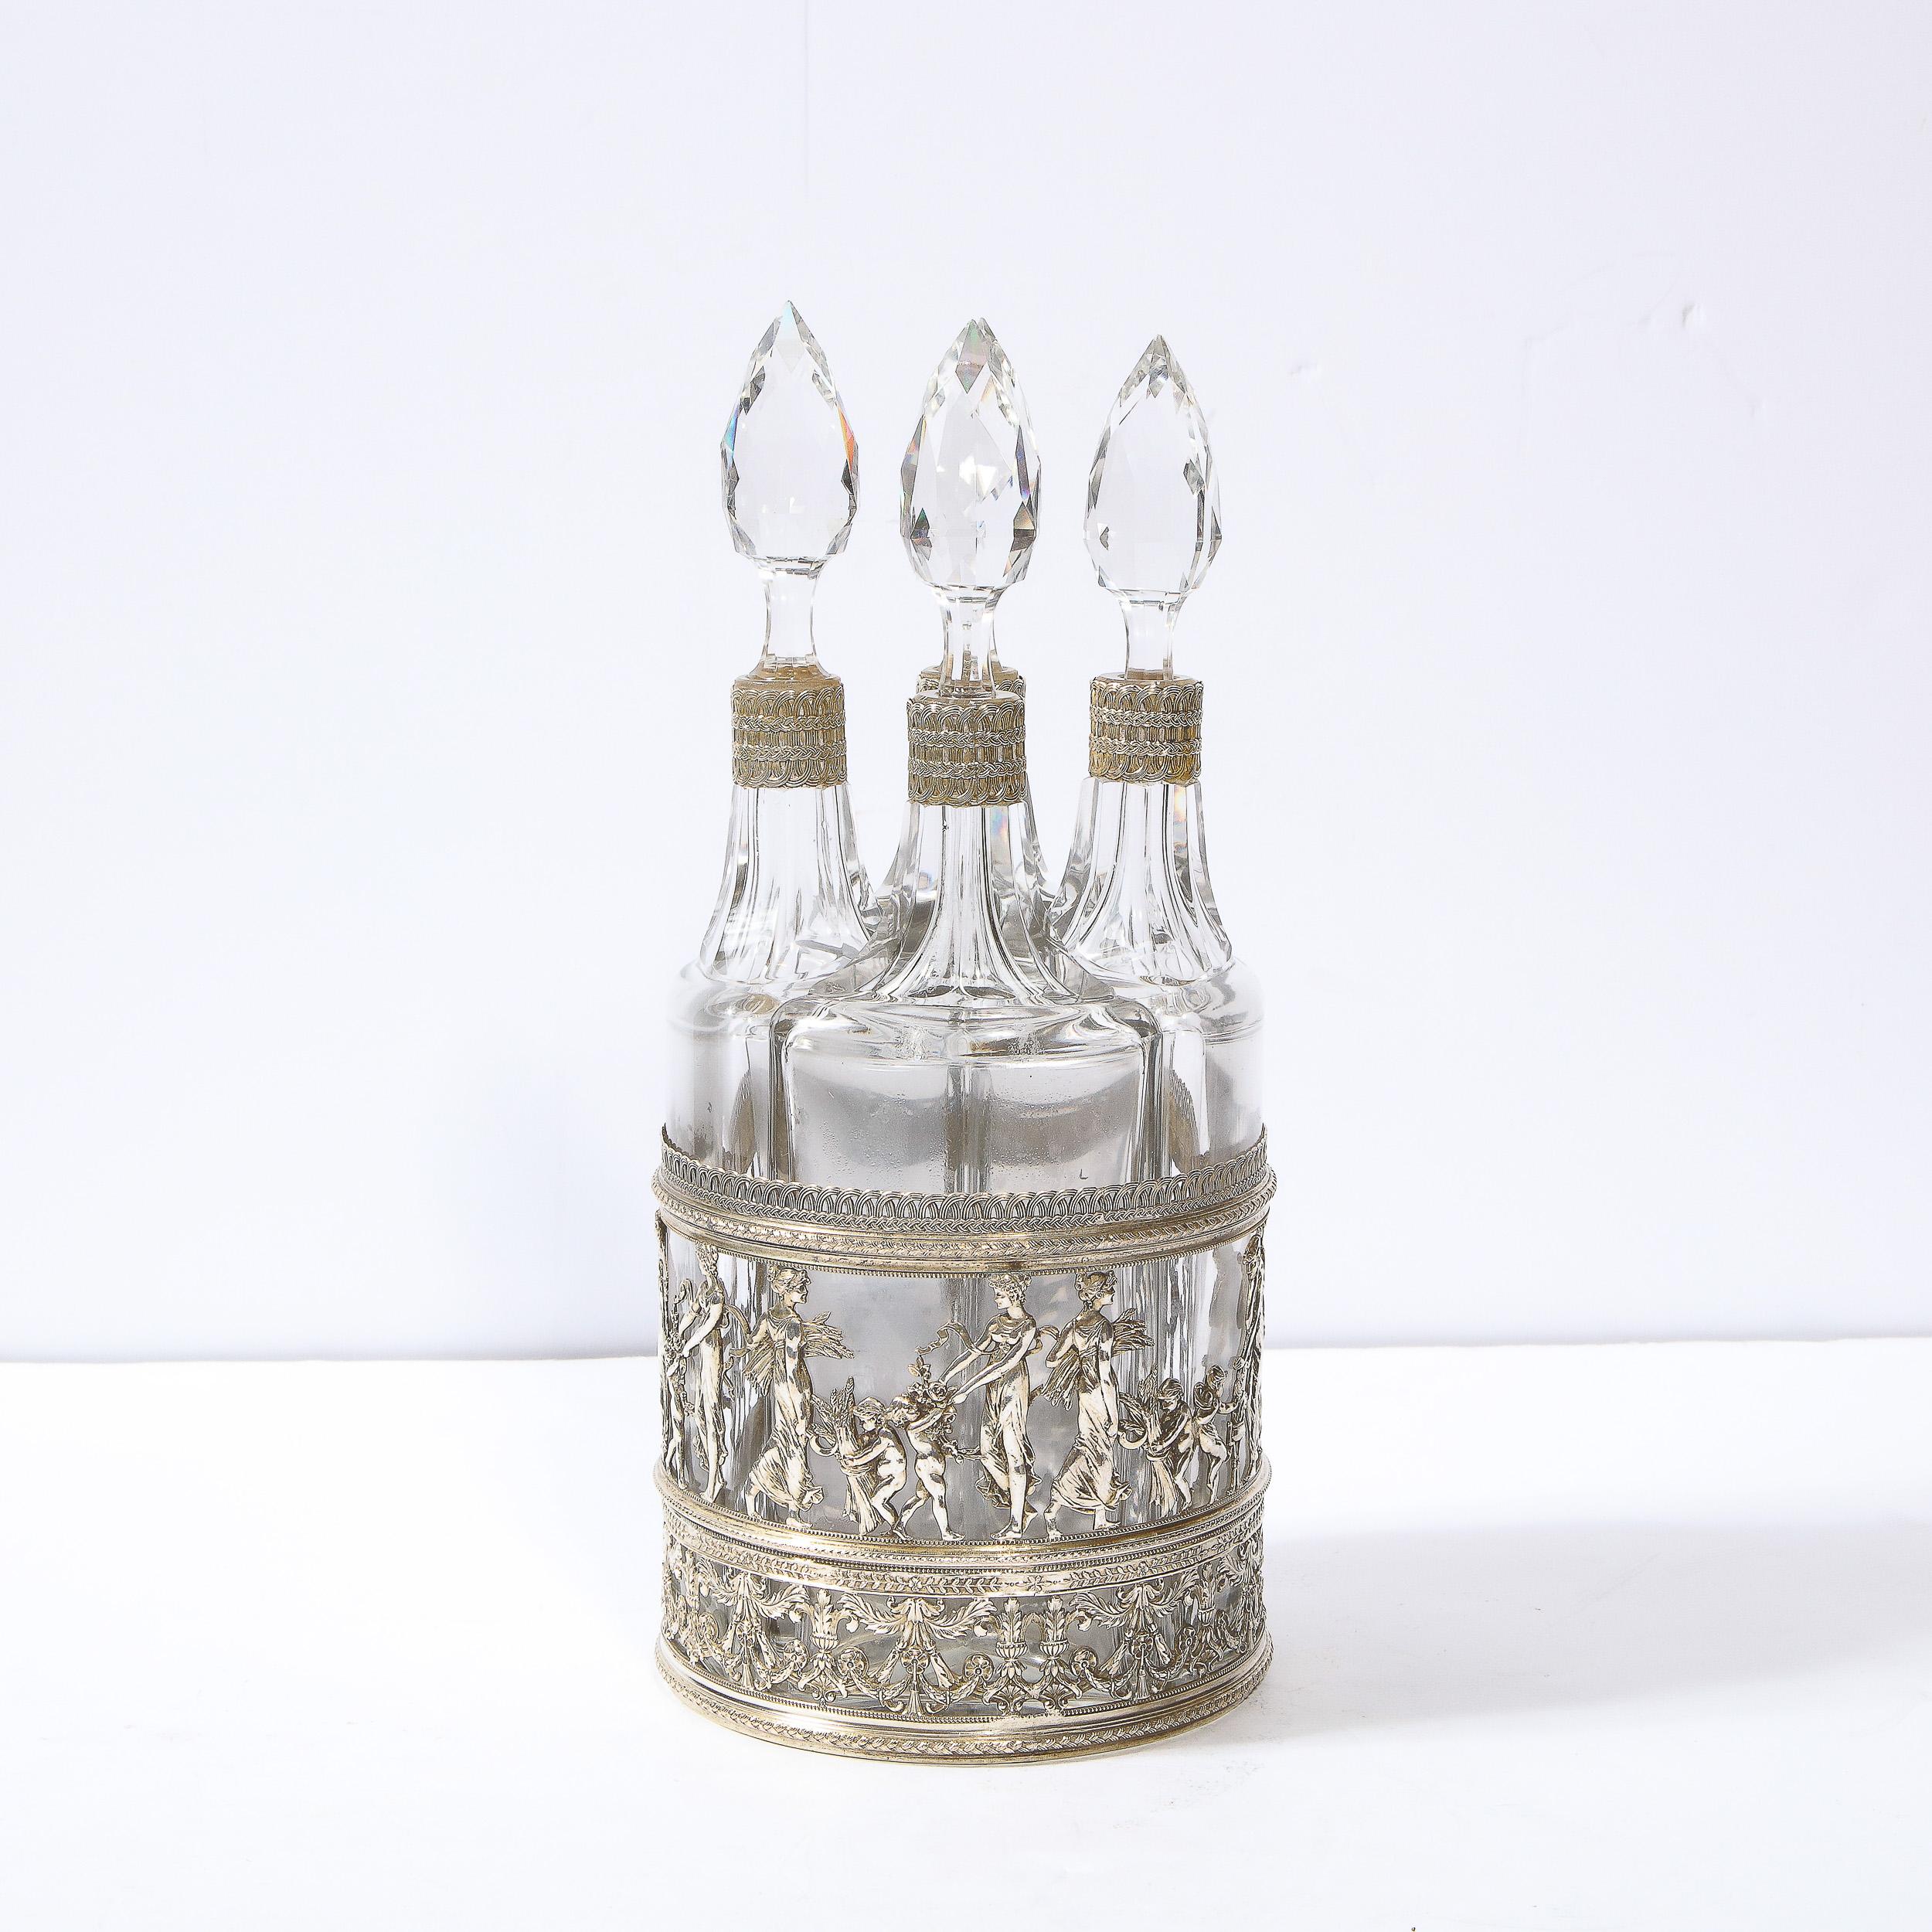 This elegant and regal fitted silver plate and cut crystal decanter set was realized in England during the 19th century. It features a cylindrical base replete with an abundance of neoclassical details in relief. The lowest band of the base offers